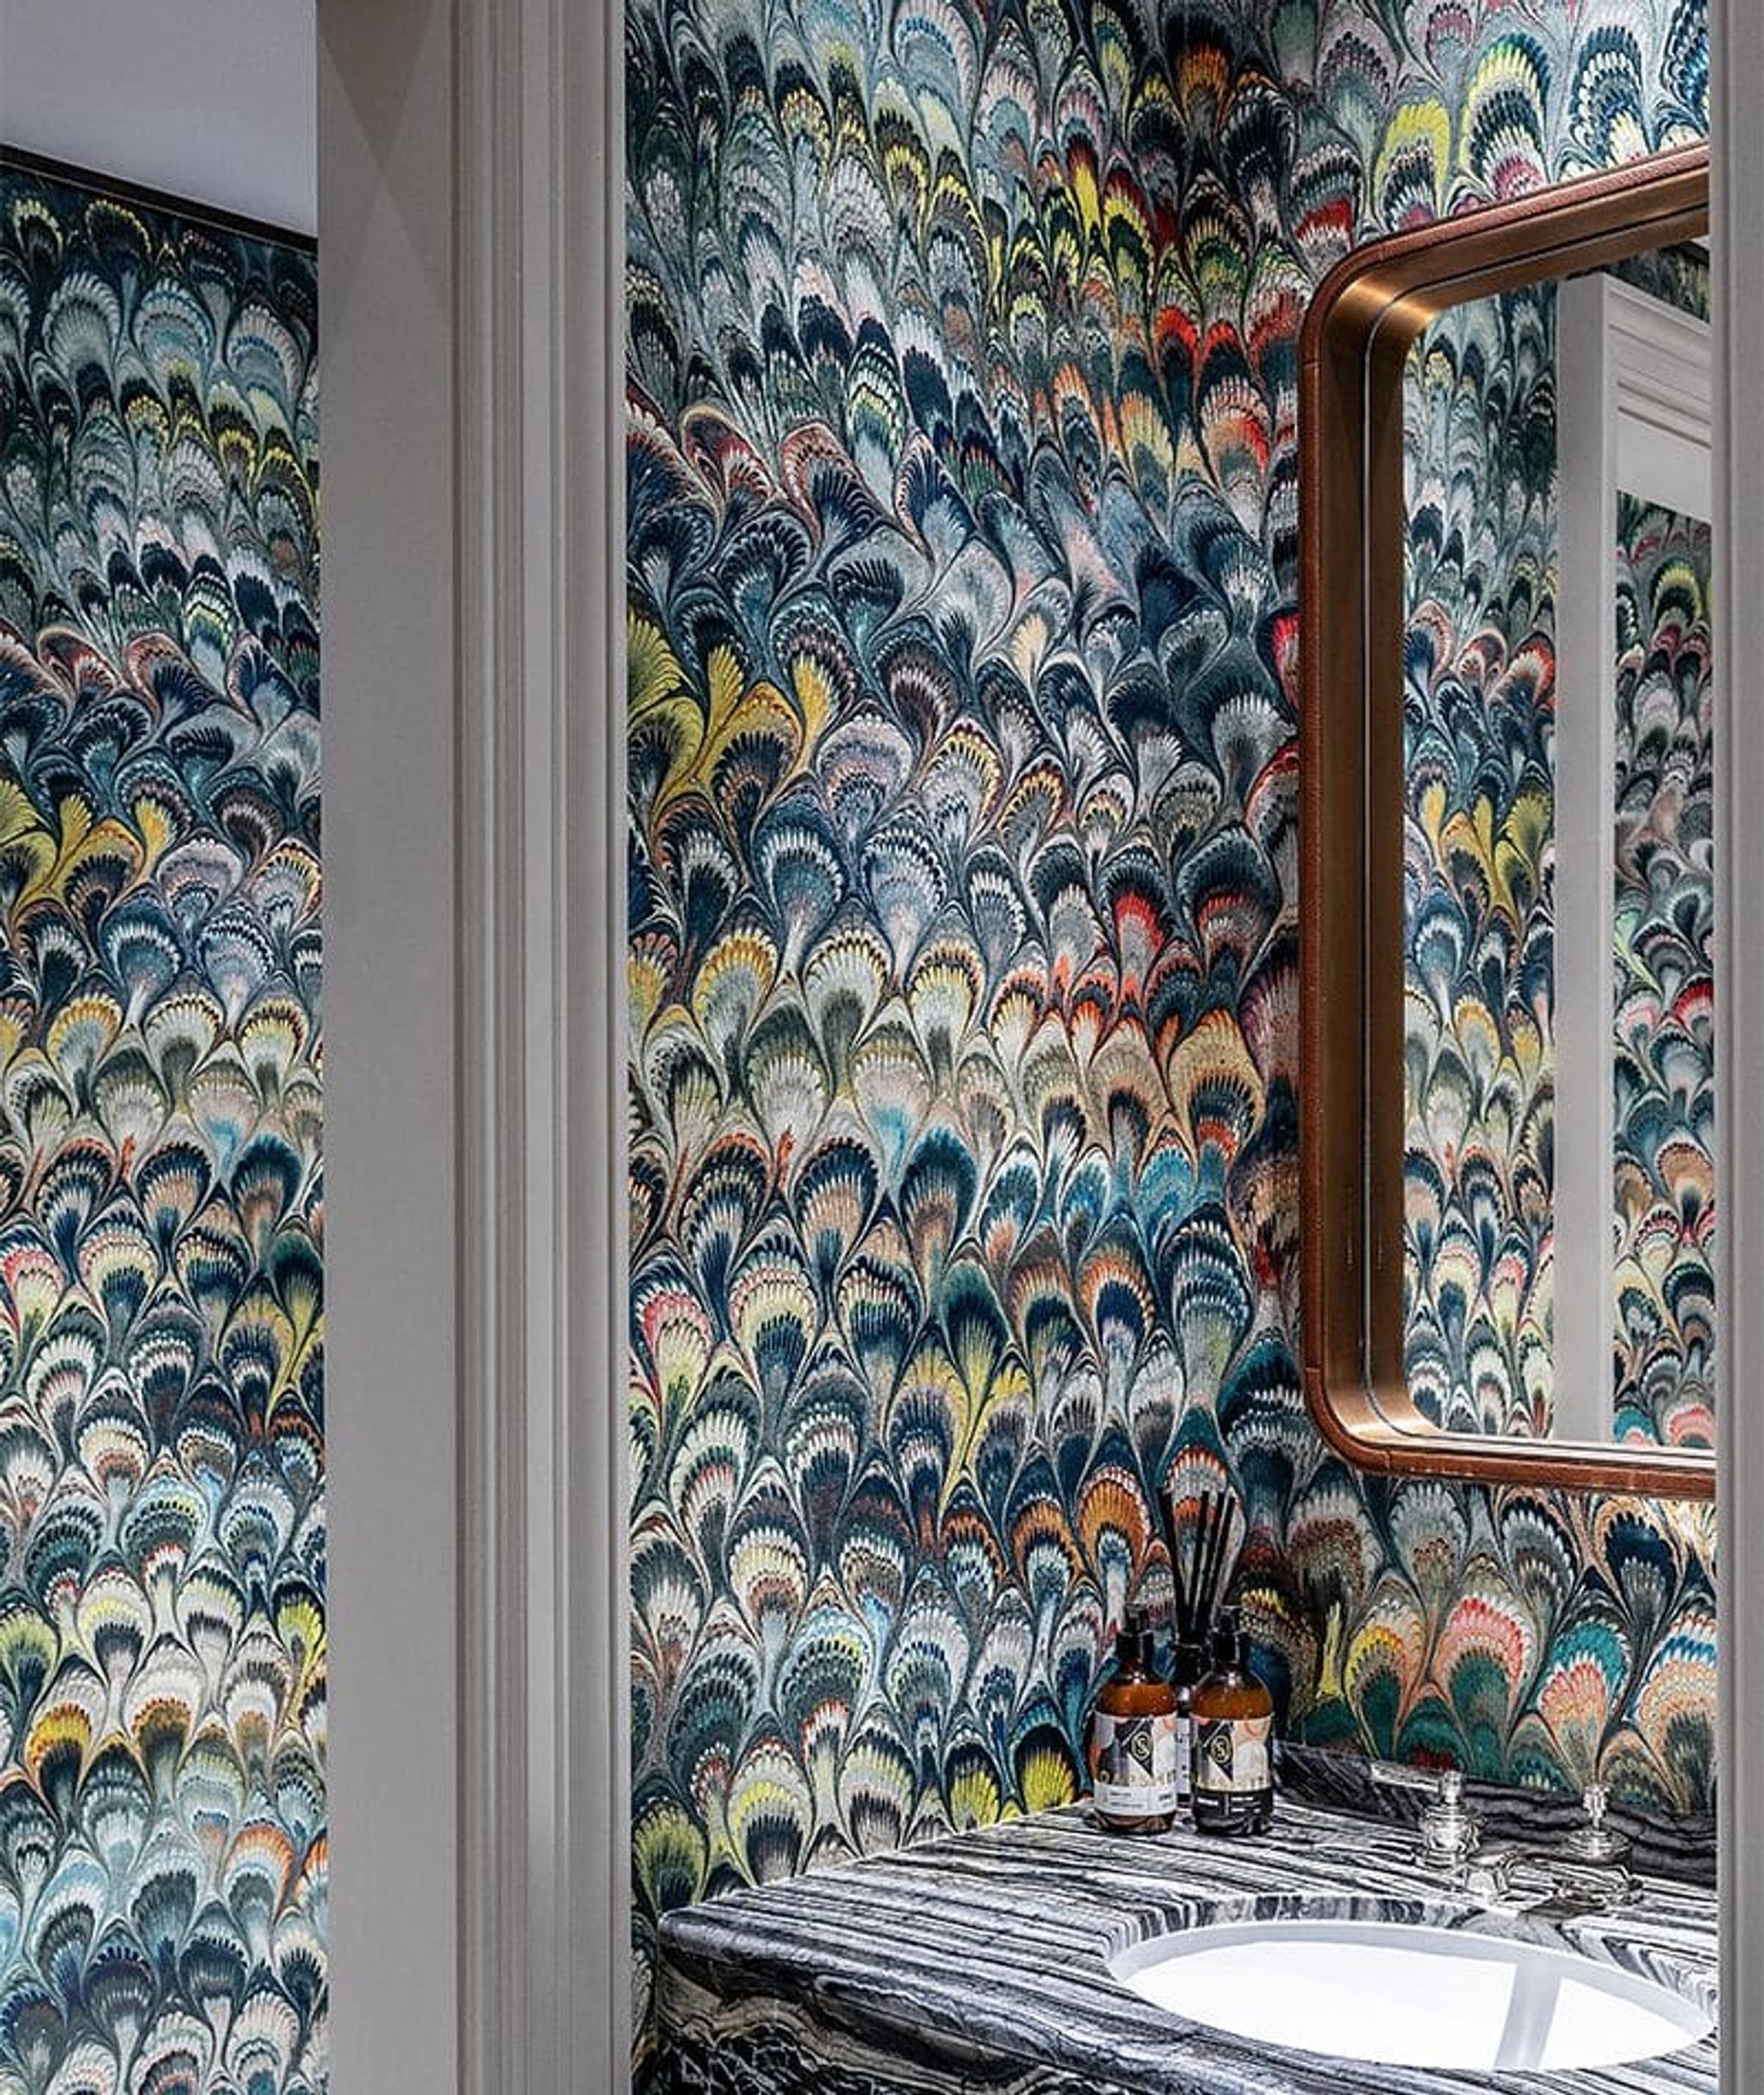 The OWO Residences, Guest Bathroom: a marbleised wallpaper has been upscaled for maximum impact in the guest bathroom